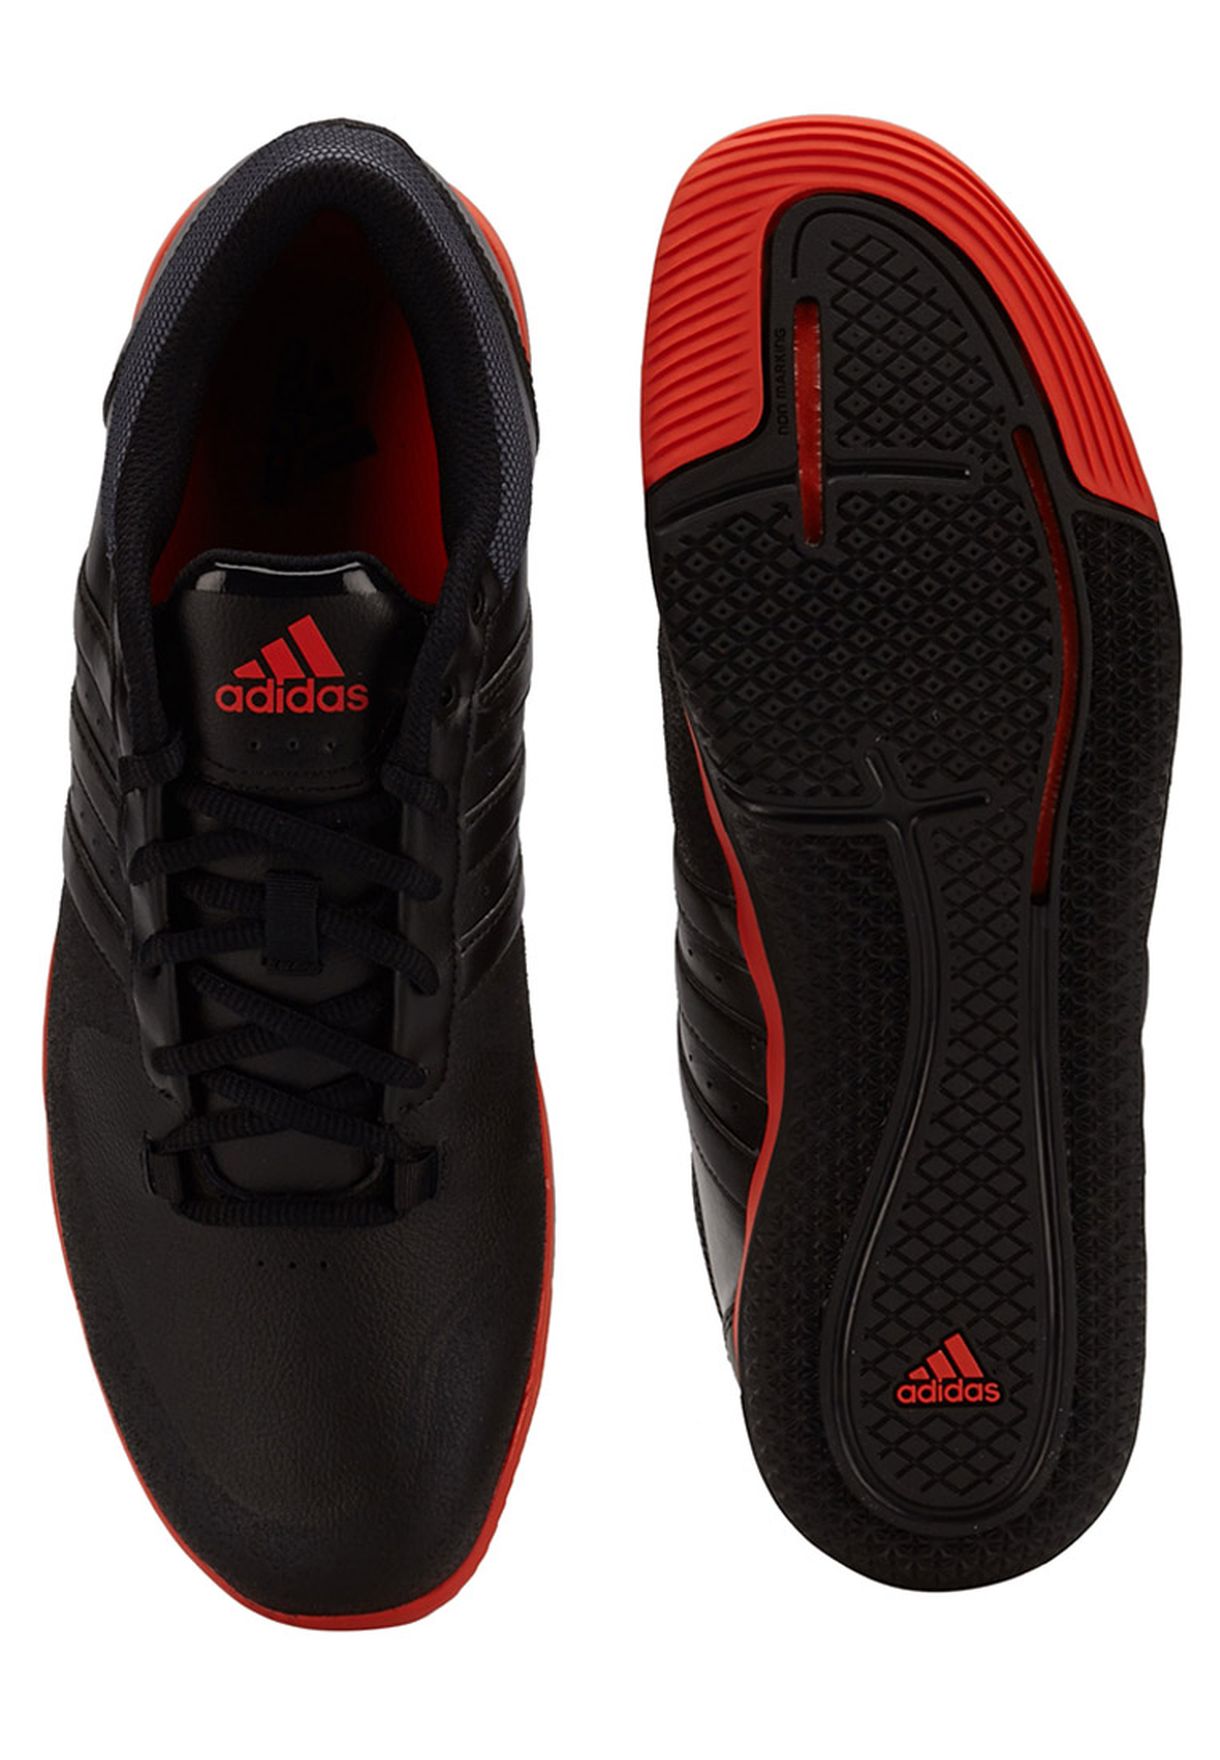 adidas low pro leather